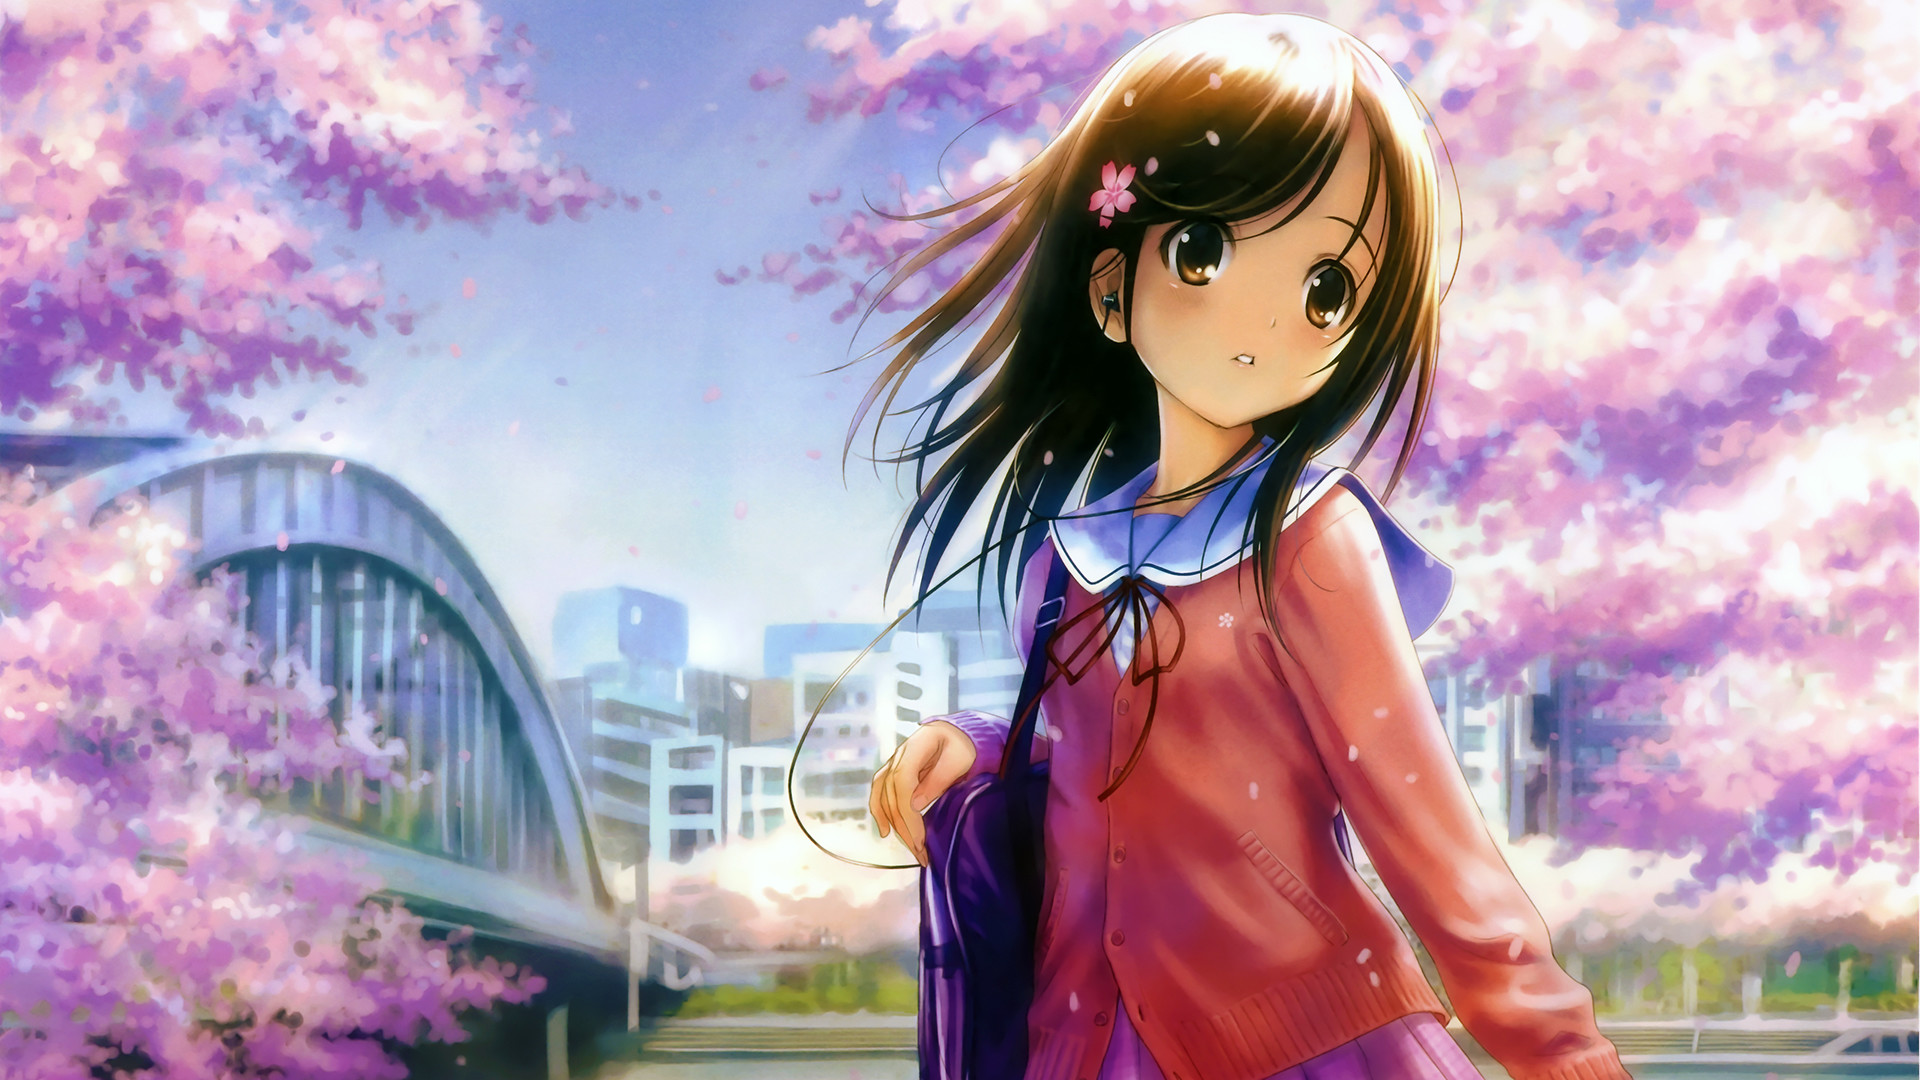 1920x1080 16 HD Cute Anime Desktop Wallpapers For Free Download